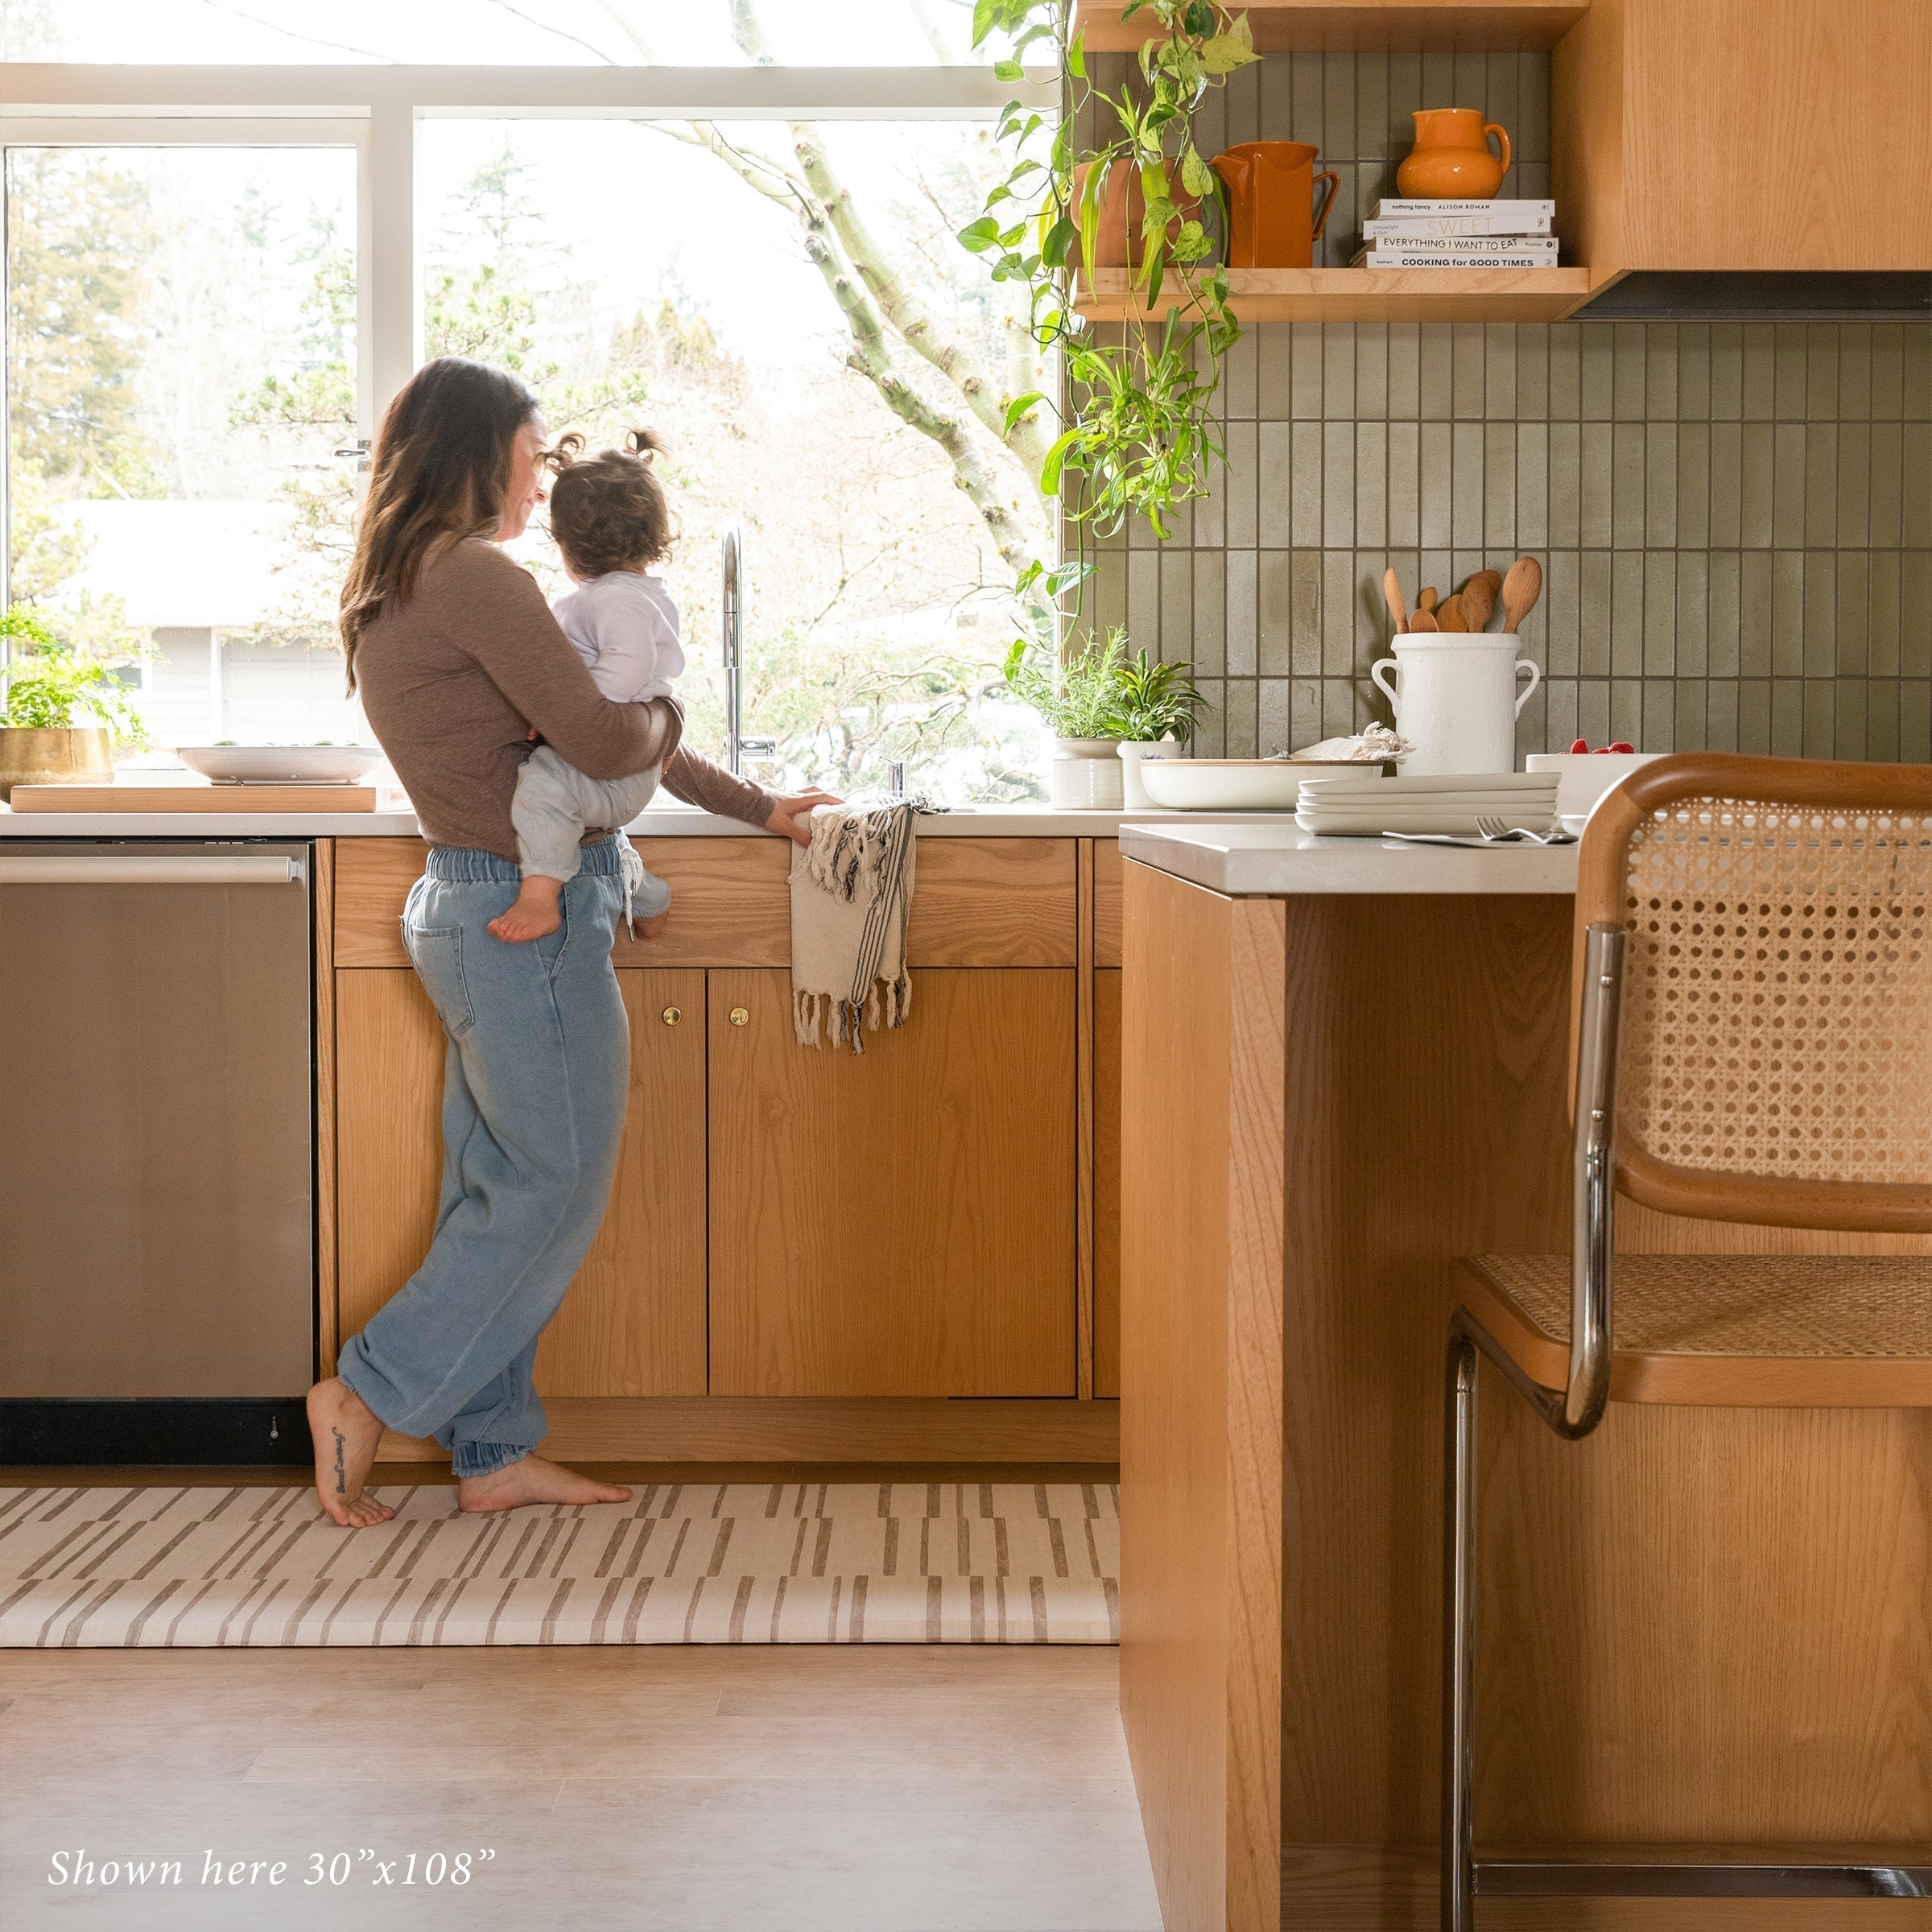 Beige inverted stripe kitchen mat in kitchen with Mom holding a baby on size 30x108.